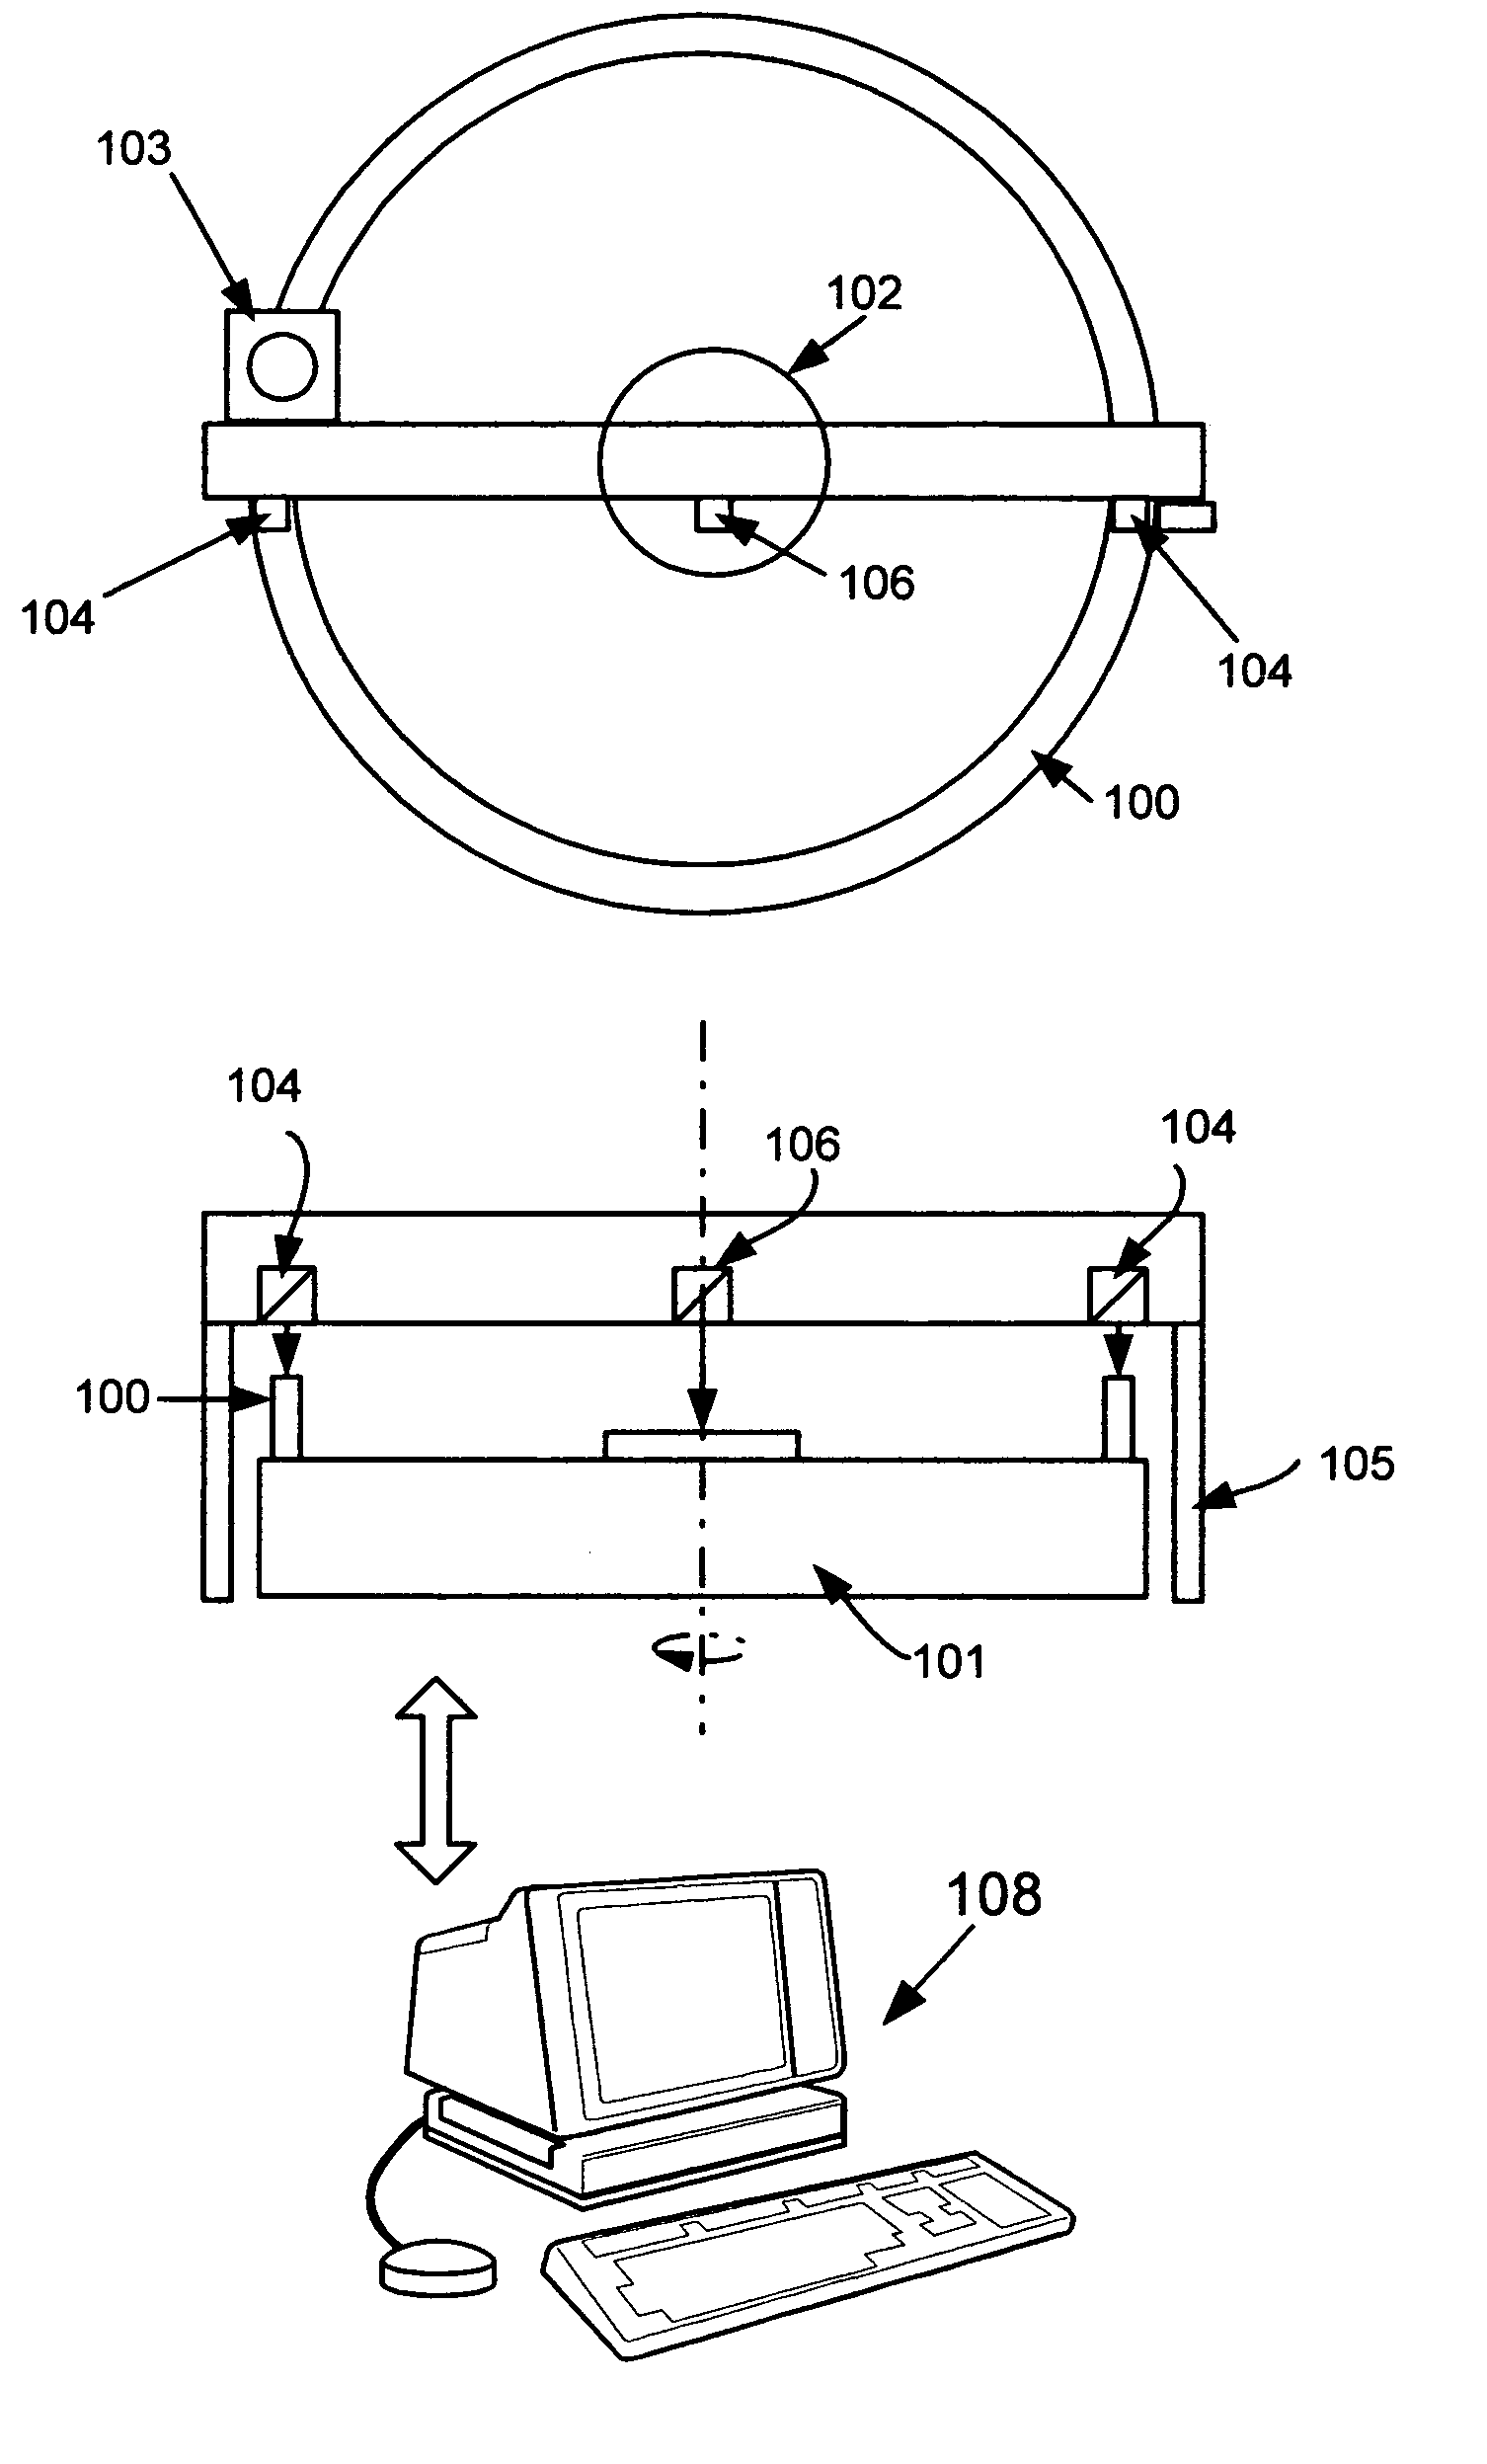 Method and apparatus for interferometric measurement of components with large aspect ratios